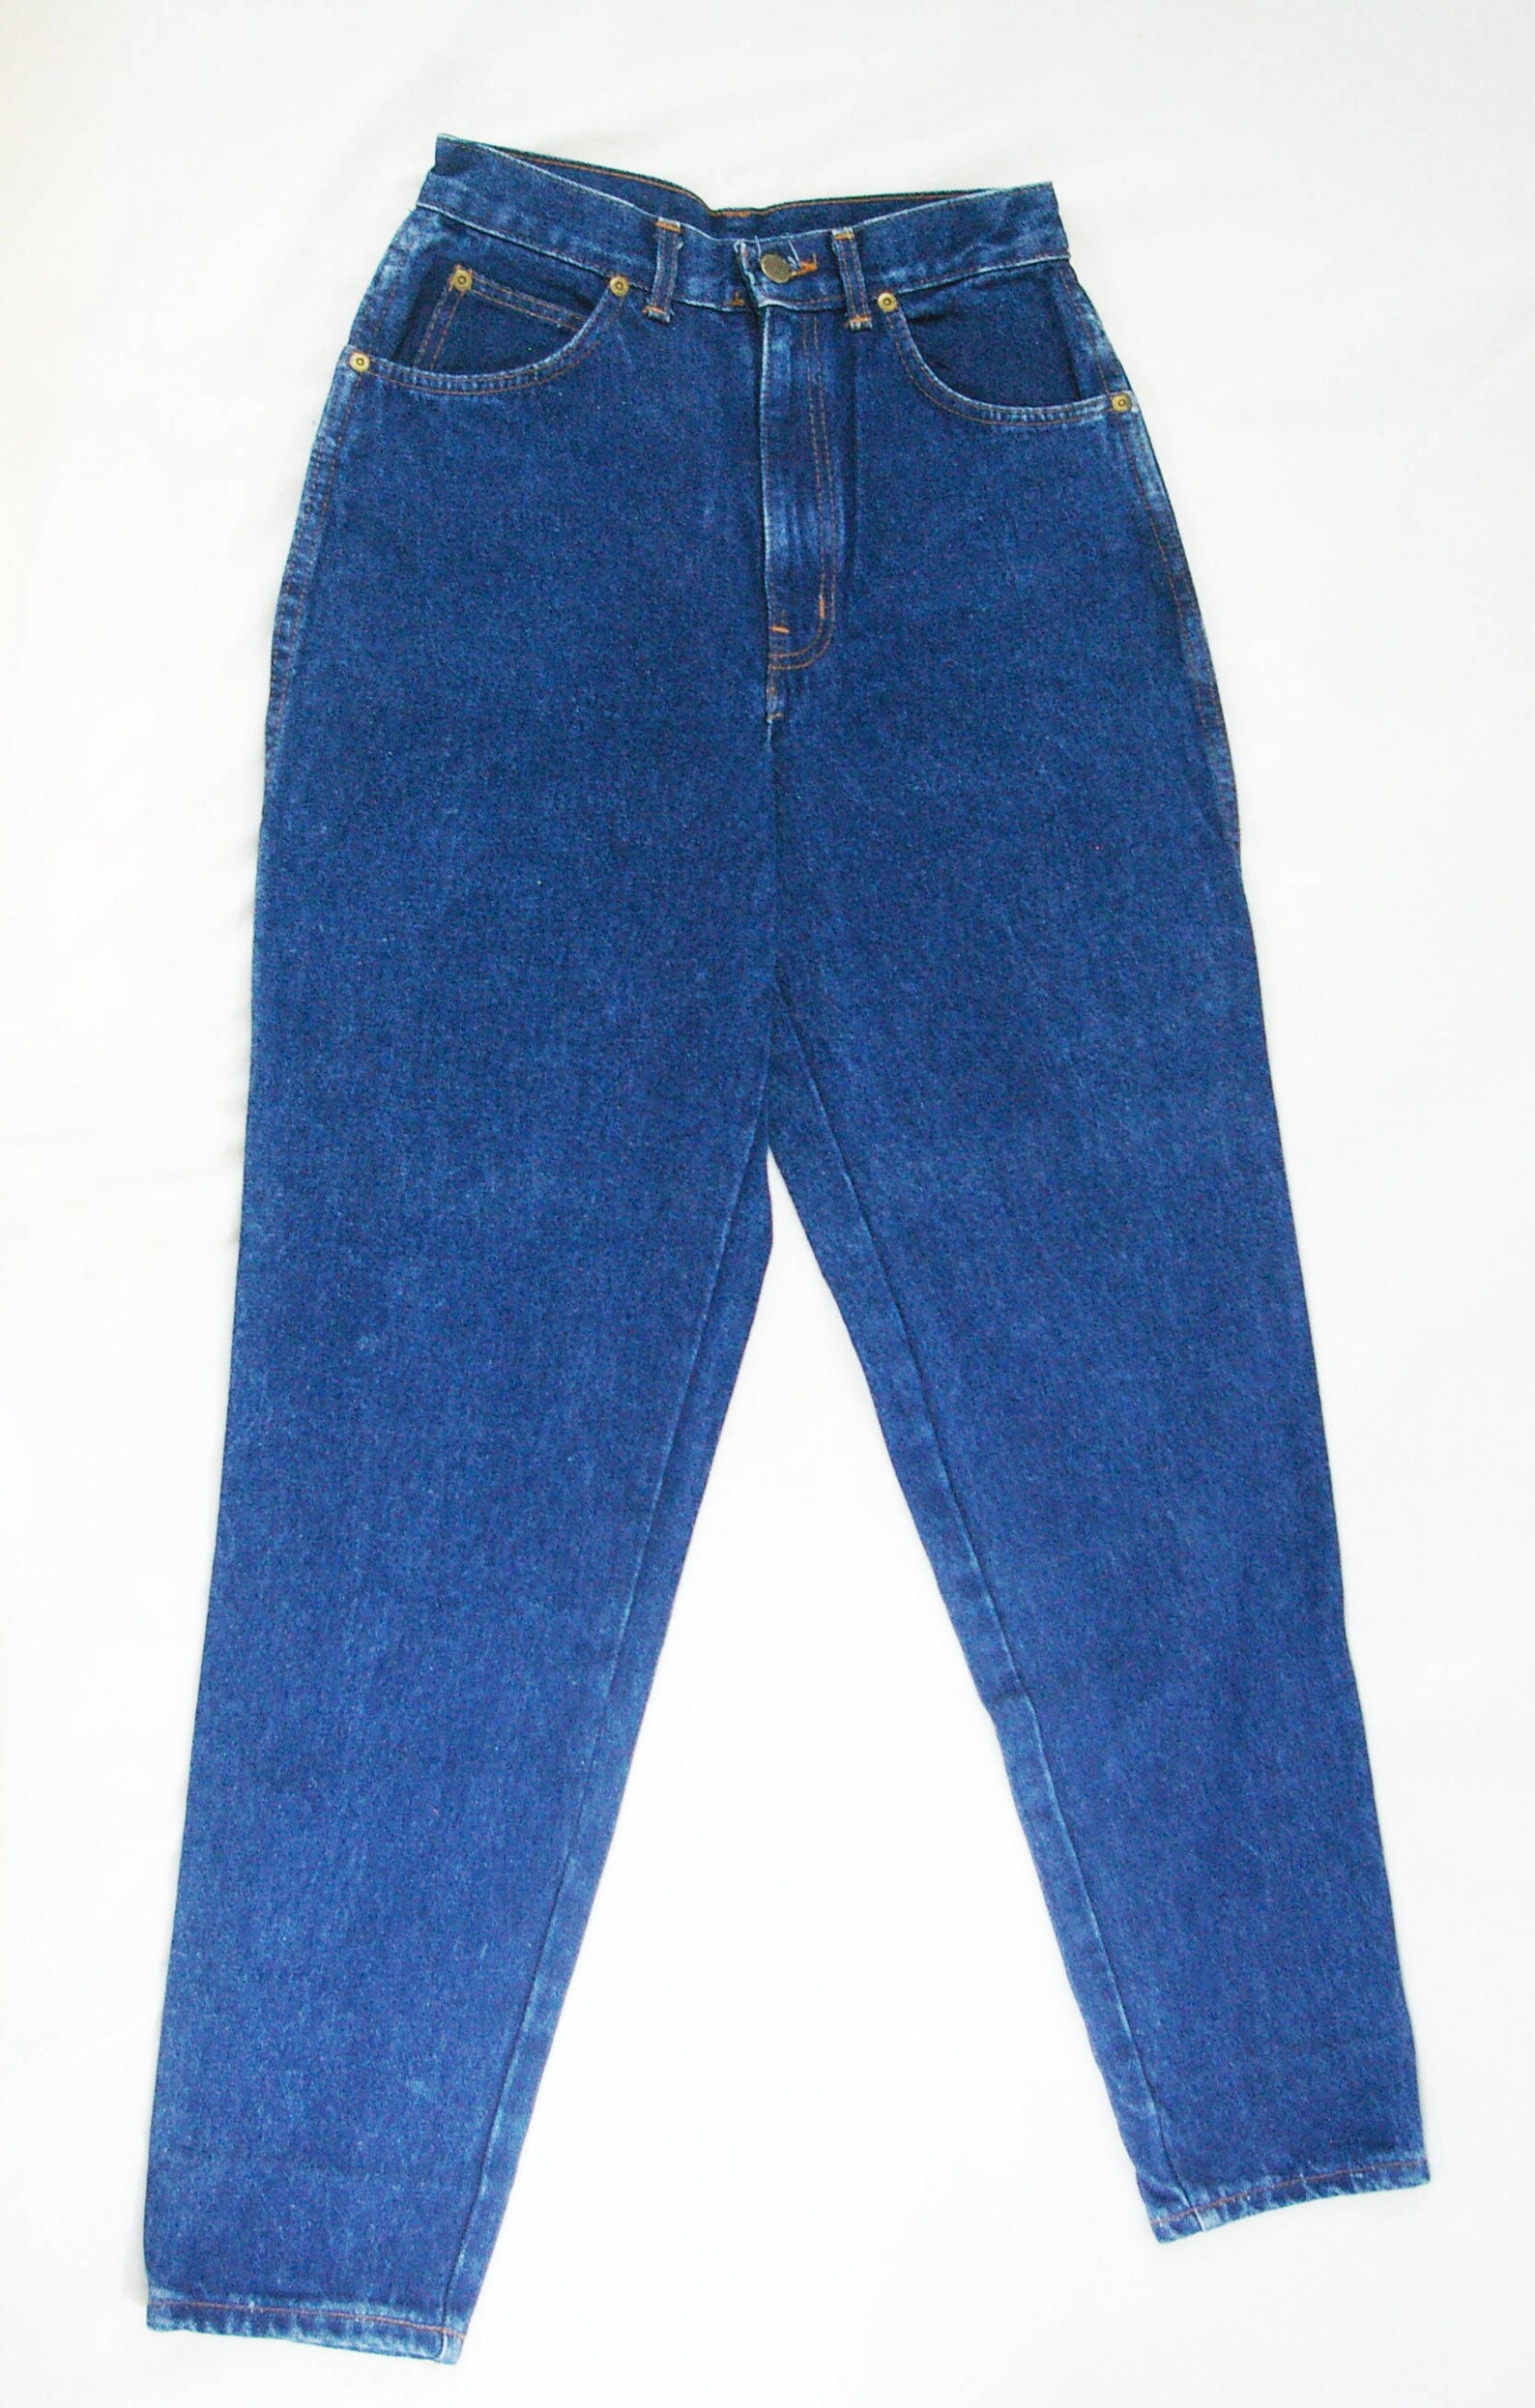 High Waist Blue Jeans 80's // Chic Jeans High Rise // | Etsy